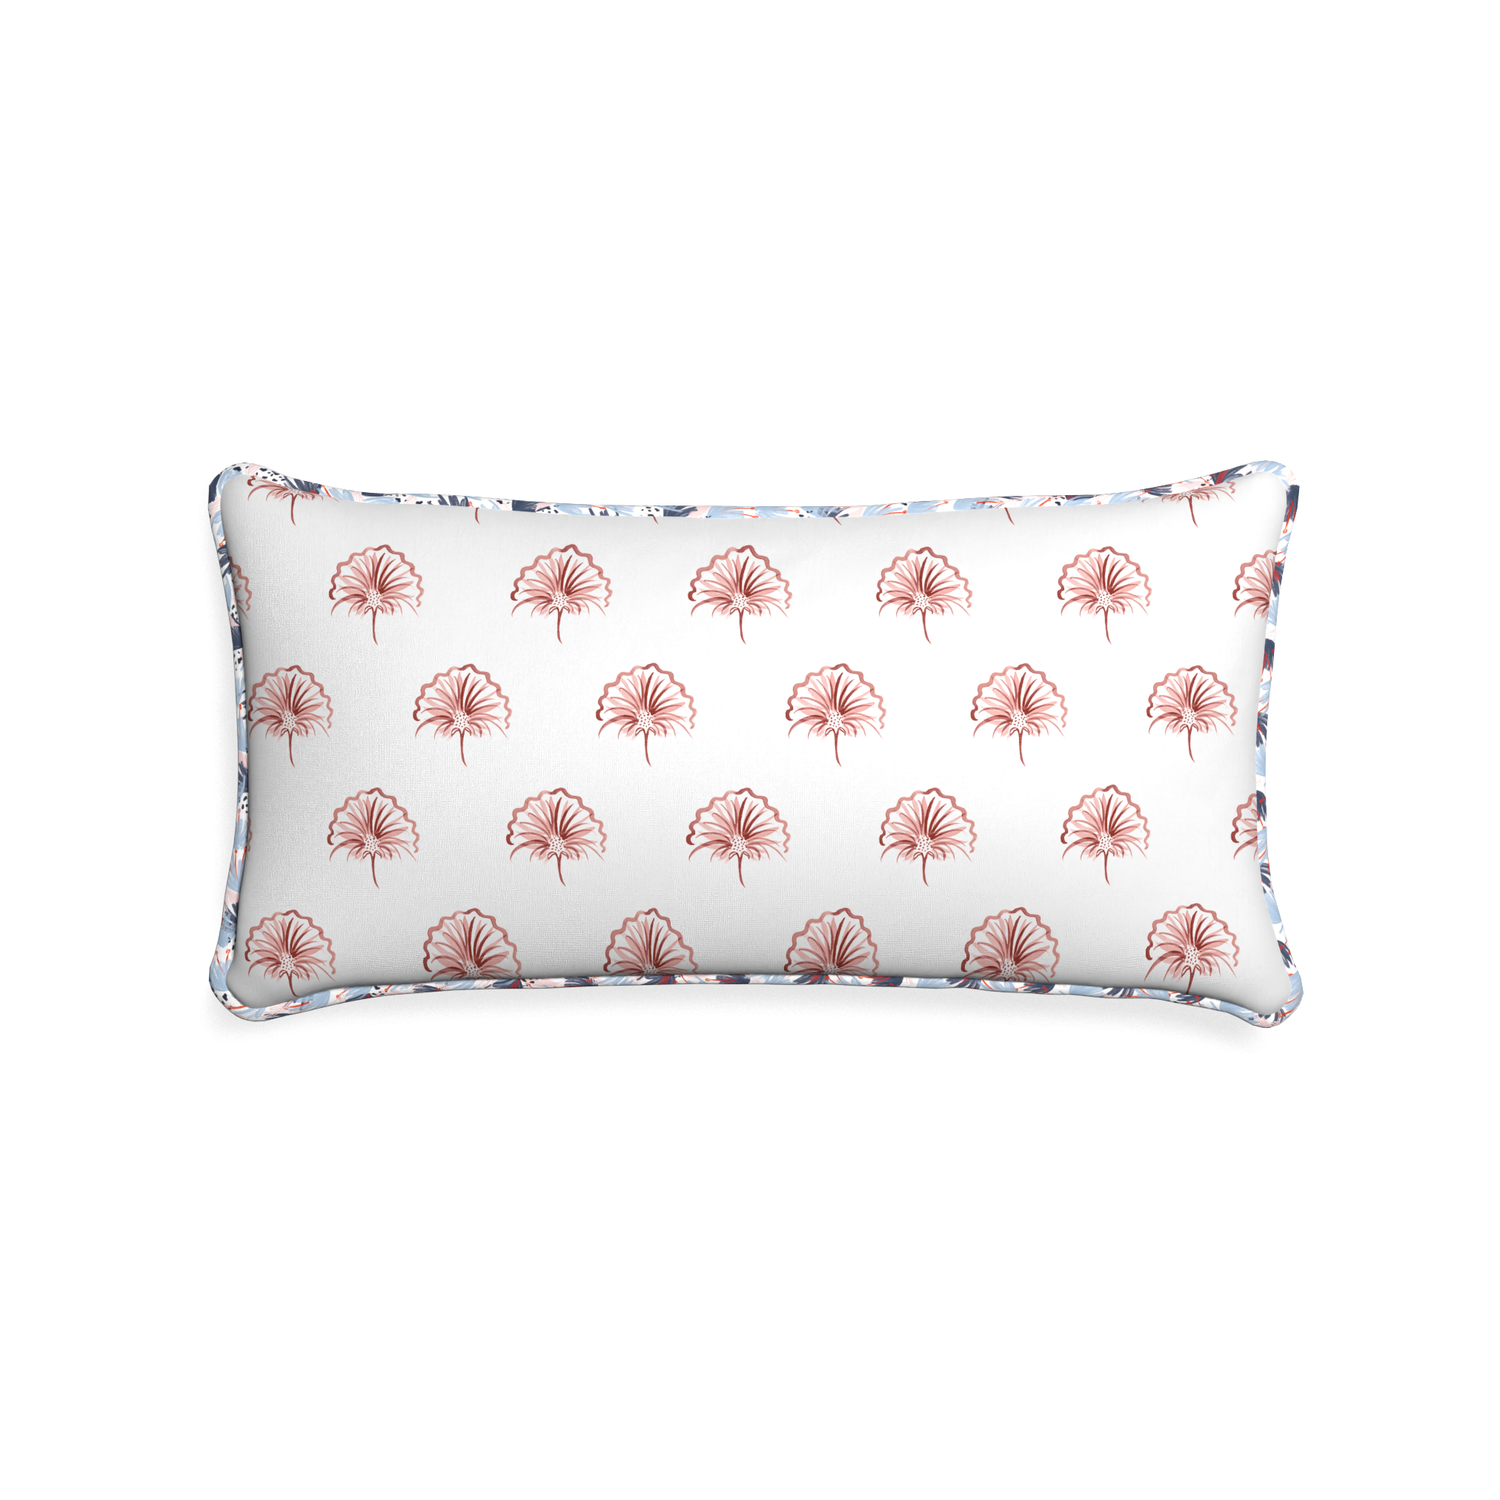 Midi-lumbar penelope rose custom floral pinkpillow with e piping on white background